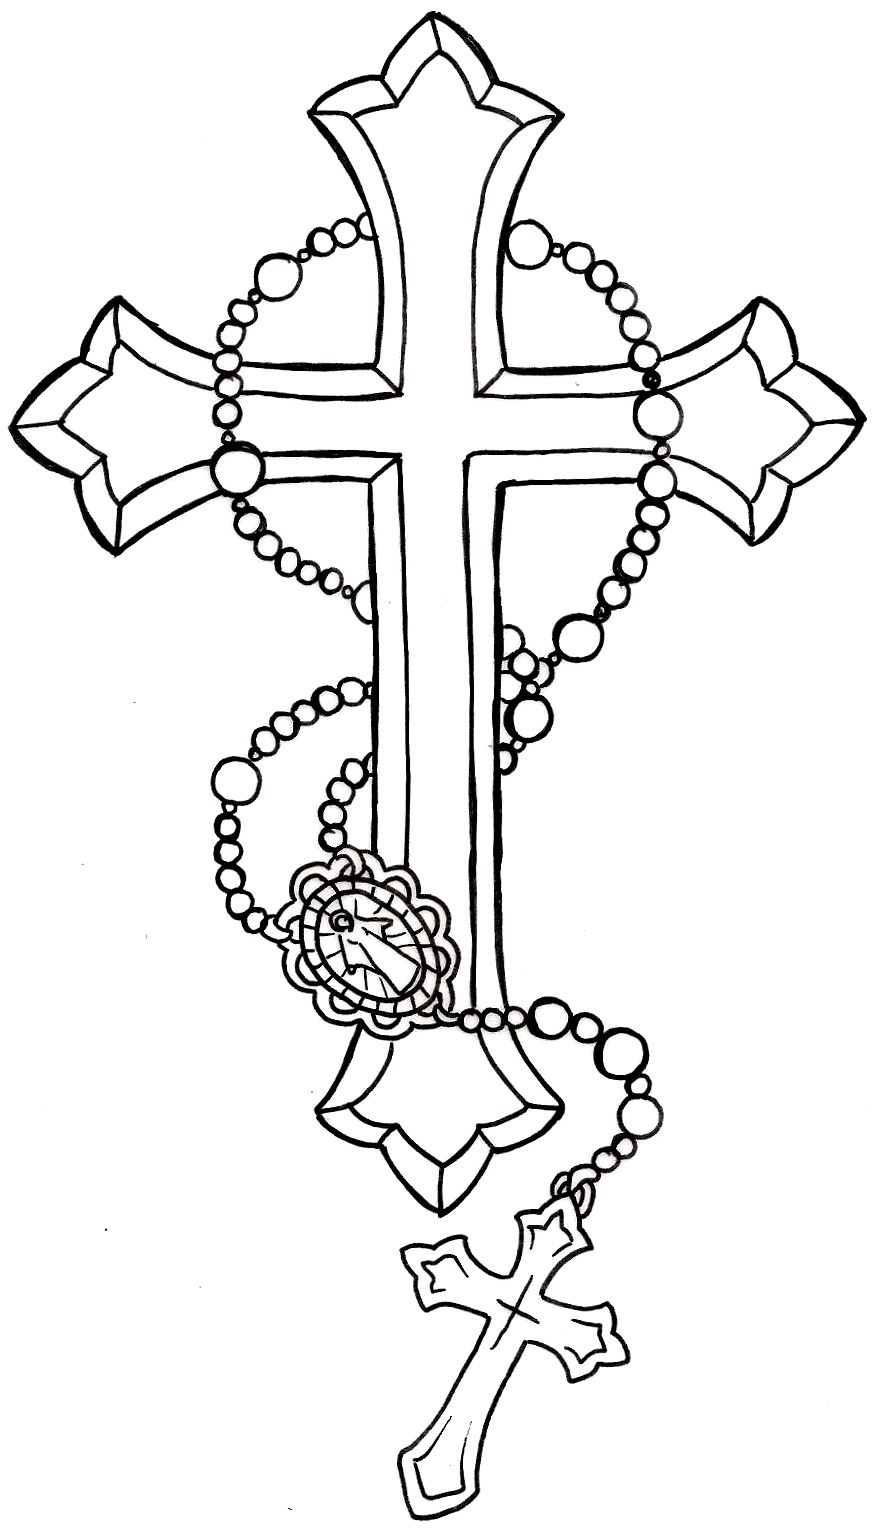 Cross With Rosary Tattoo Metacharis On Deviantart Tattoos And intended for dimensions 882 X 1532